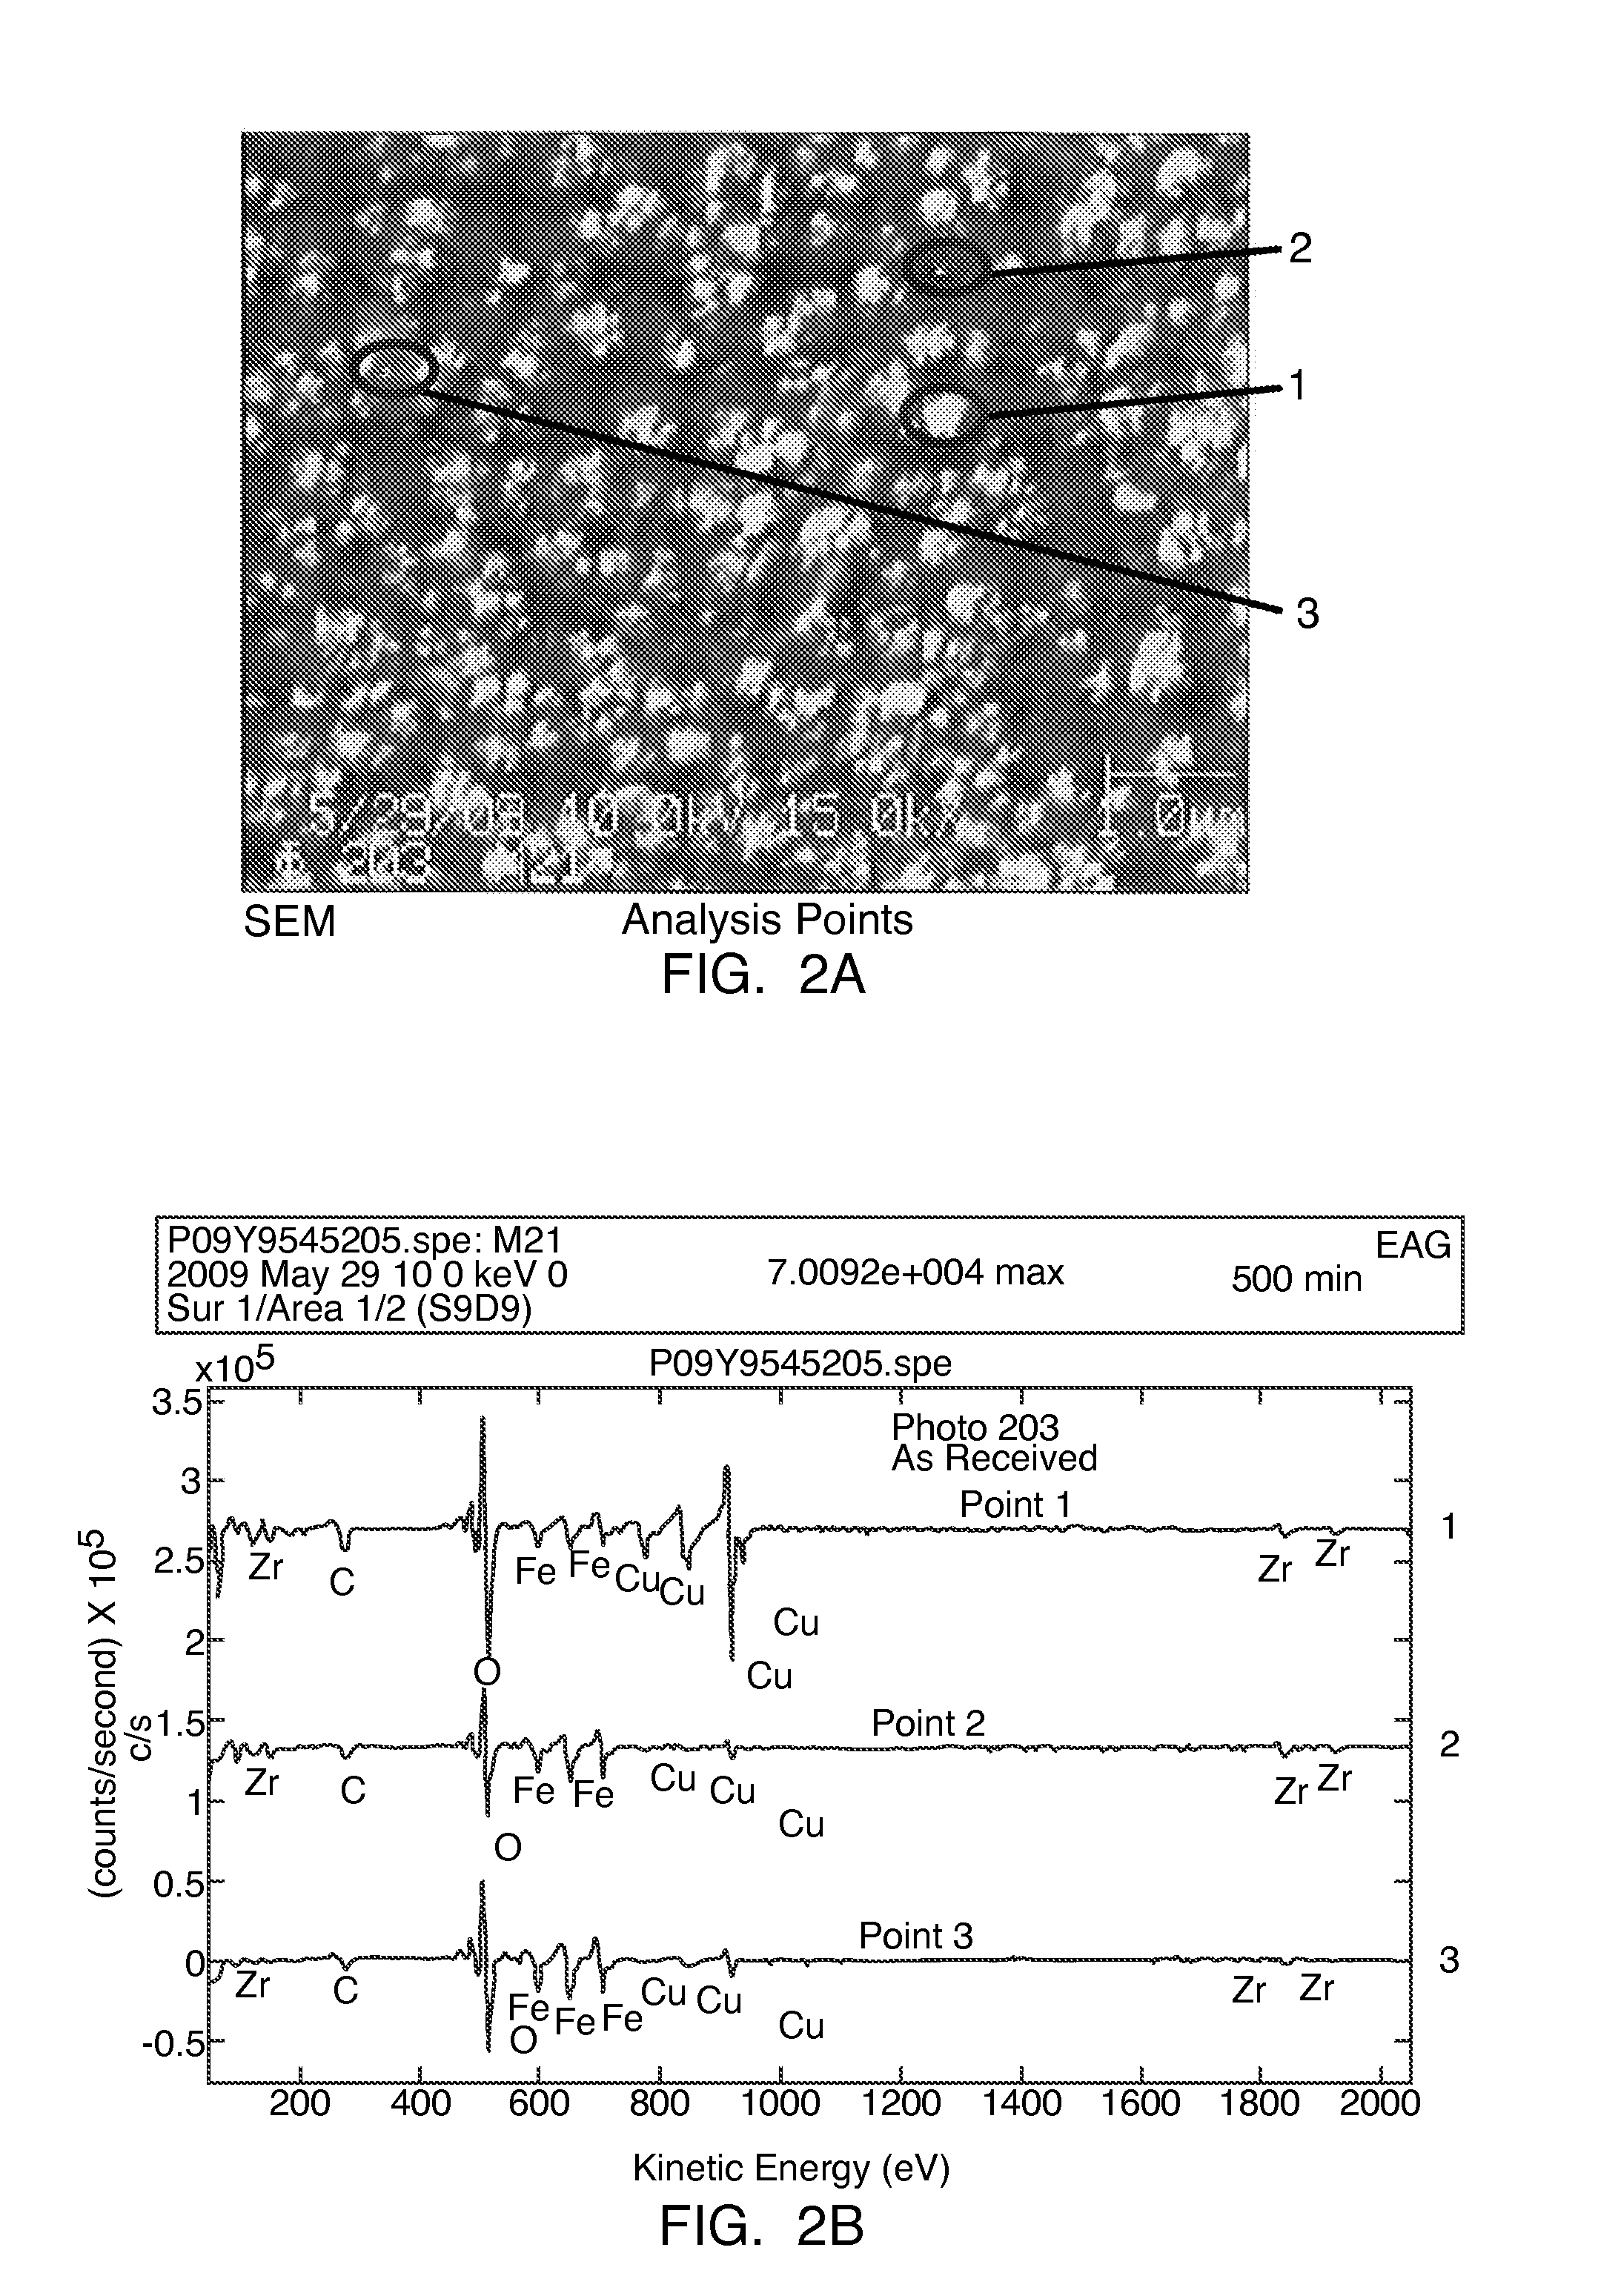 Metal pretreatment composition containing zirconium, copper, and metal chelating agents and related coatings on metal substrates